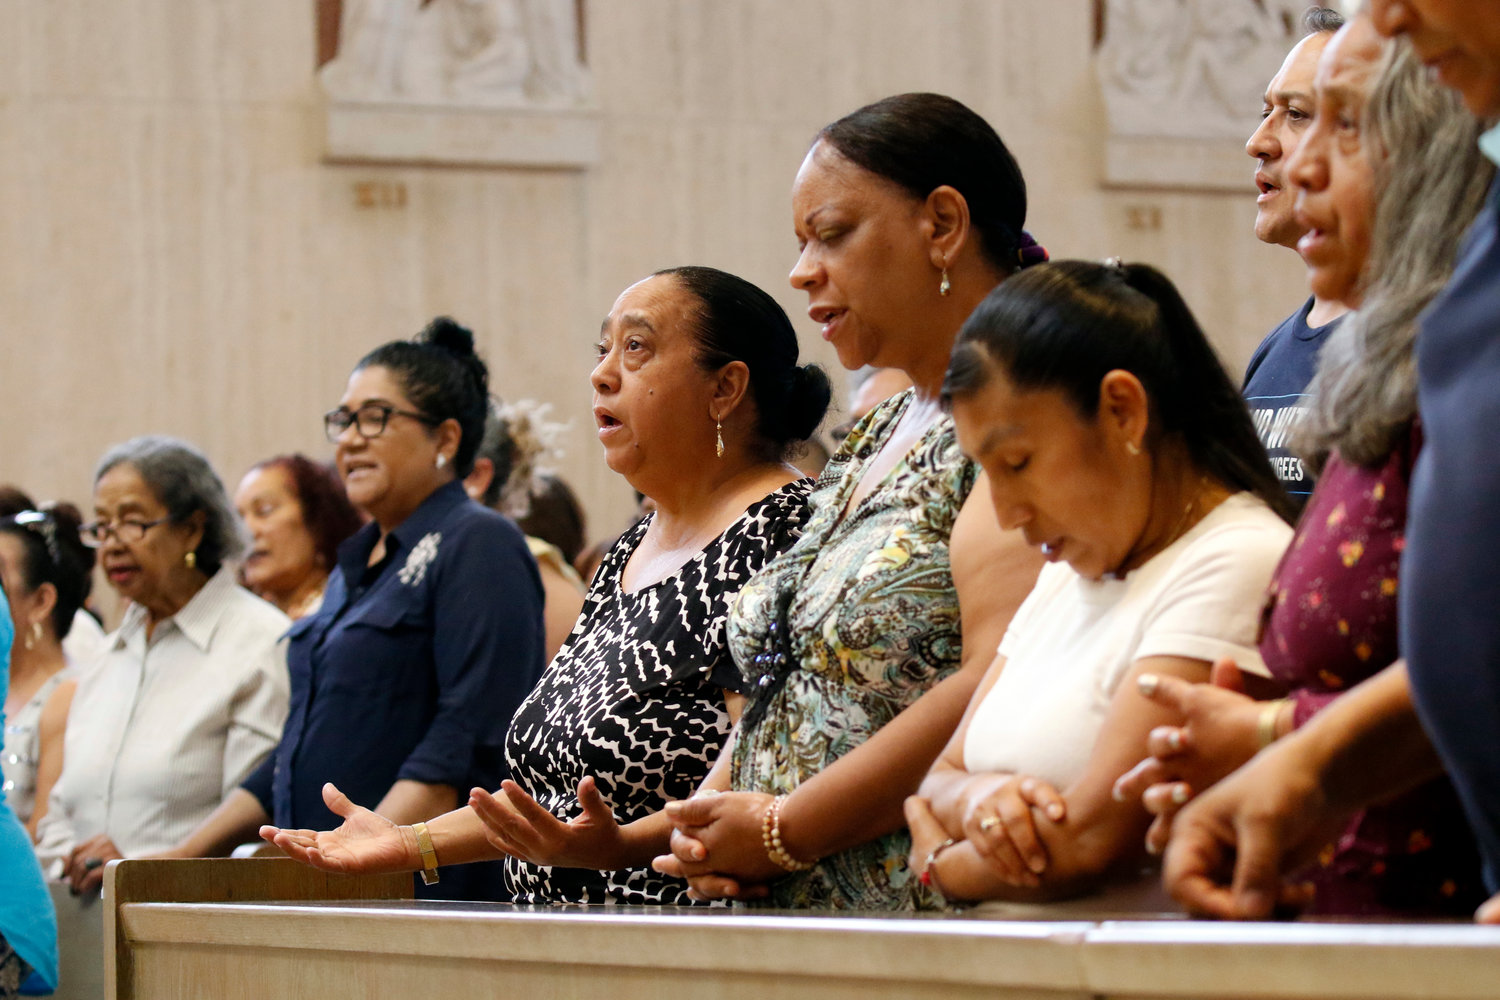 Worshippers pray during a Spanish-language Mass for immigrants July 13, 2019, at St. Frances Xavier Cabrini Shrine in New York City. The liturgy was part of the shrine’s daylong celebration marking the birthday of its patroness. An Italian immigrant born July 15, 1850, Mother Cabrini was the first U.S. citizen to be canonized and is the patron saint of immigrants.